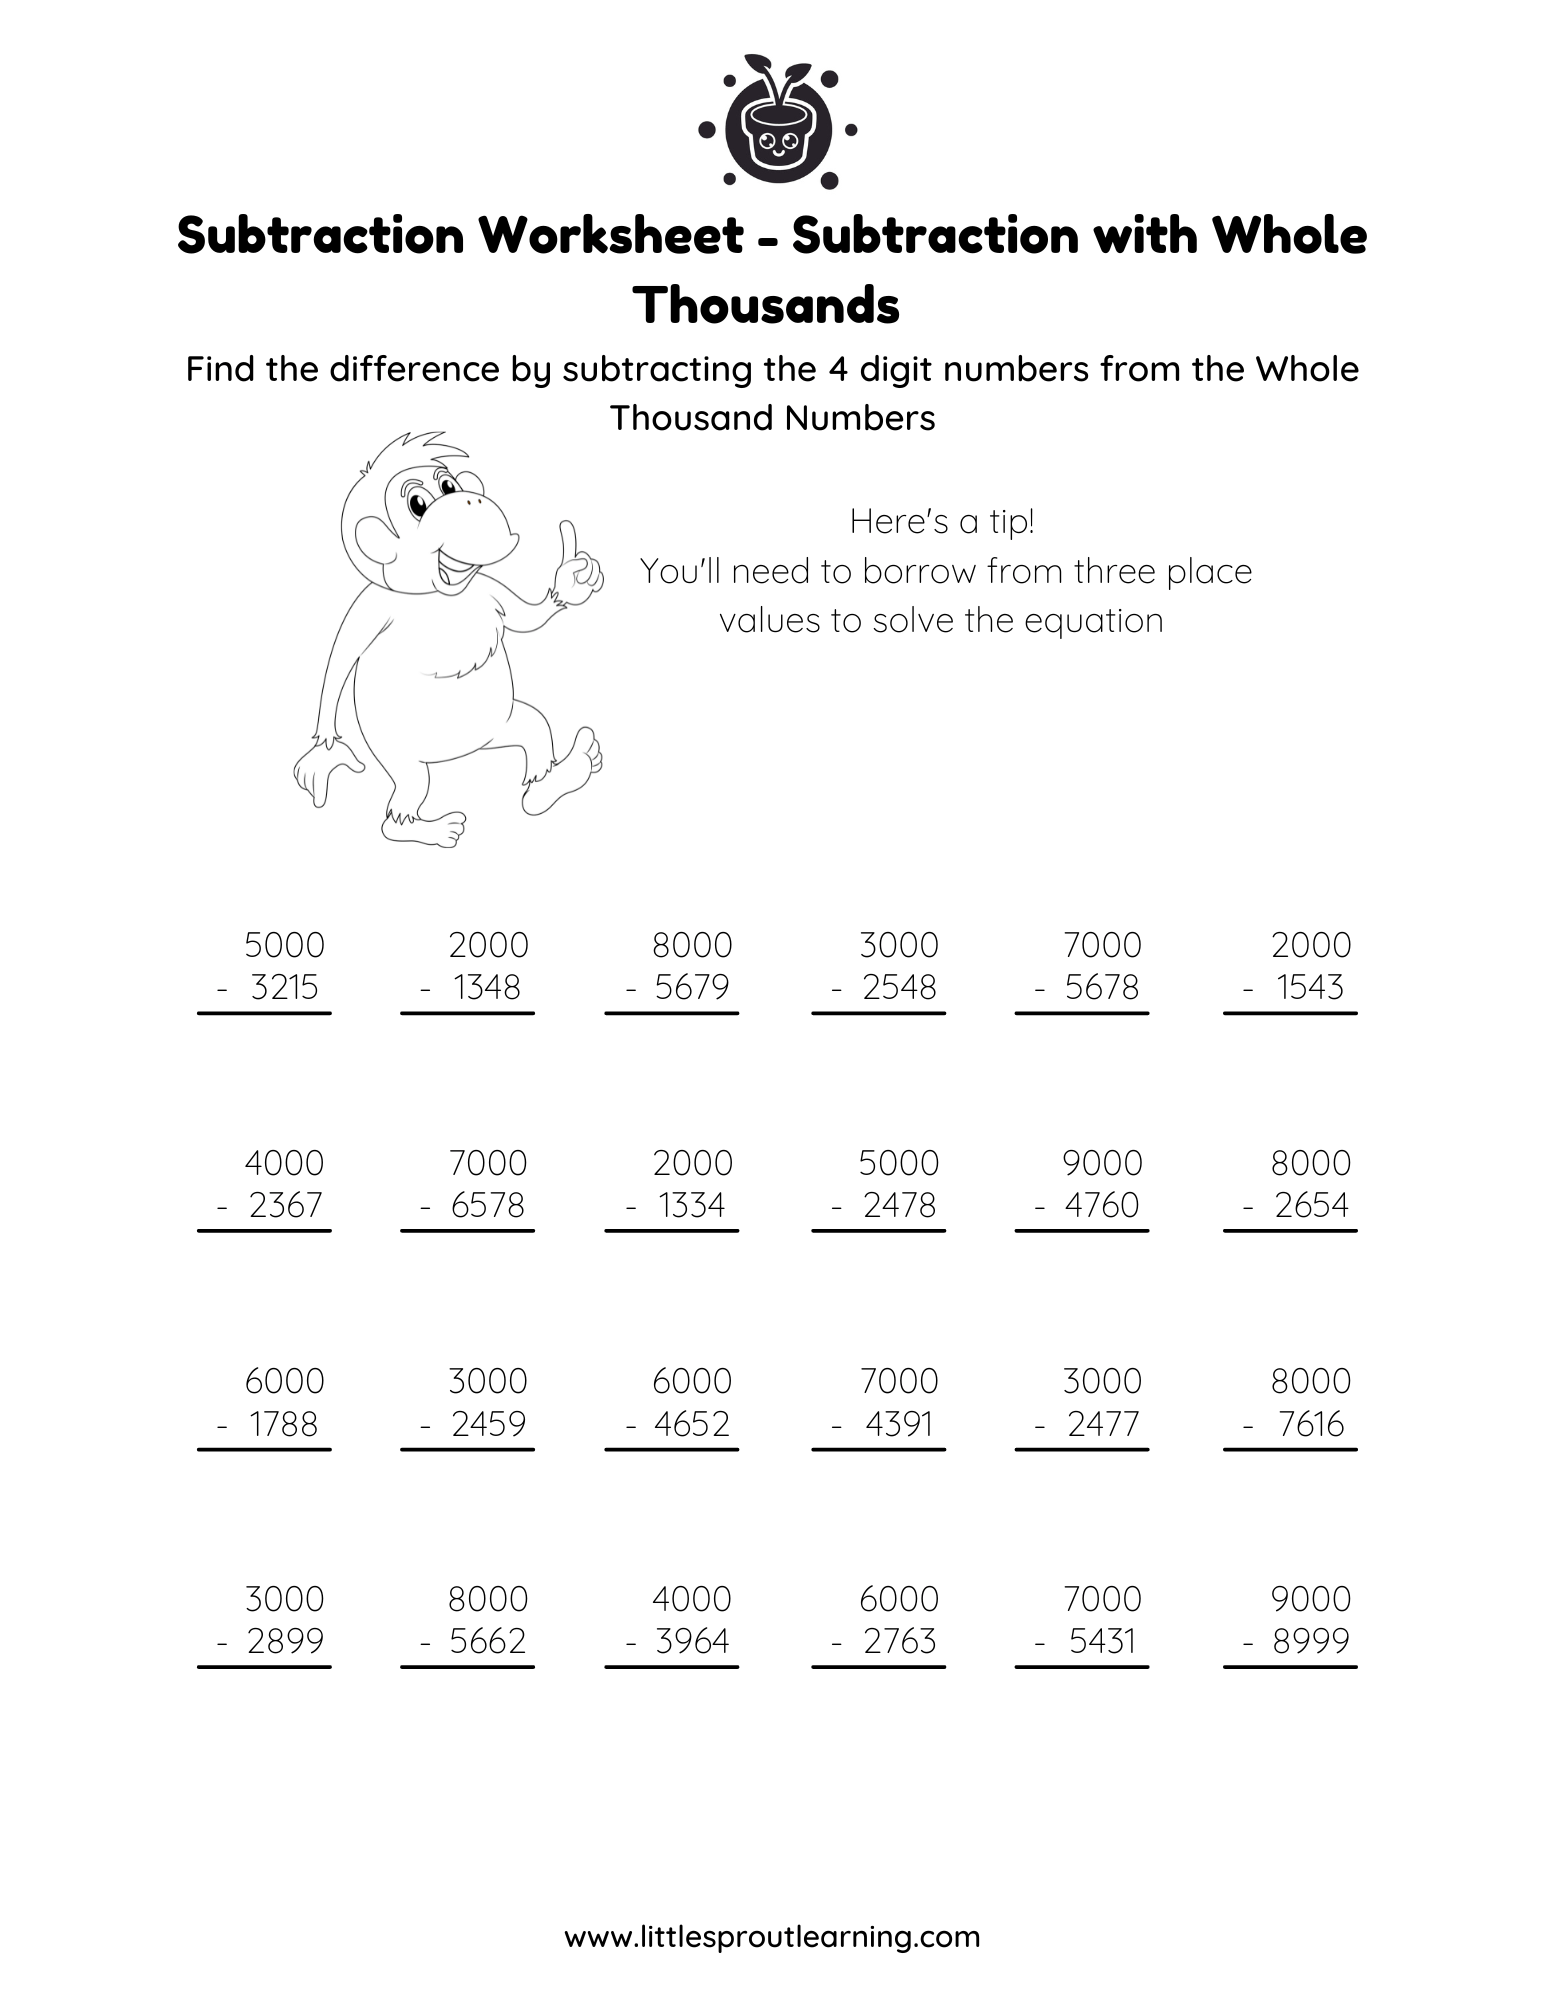 Subtraction with Whole Thousands